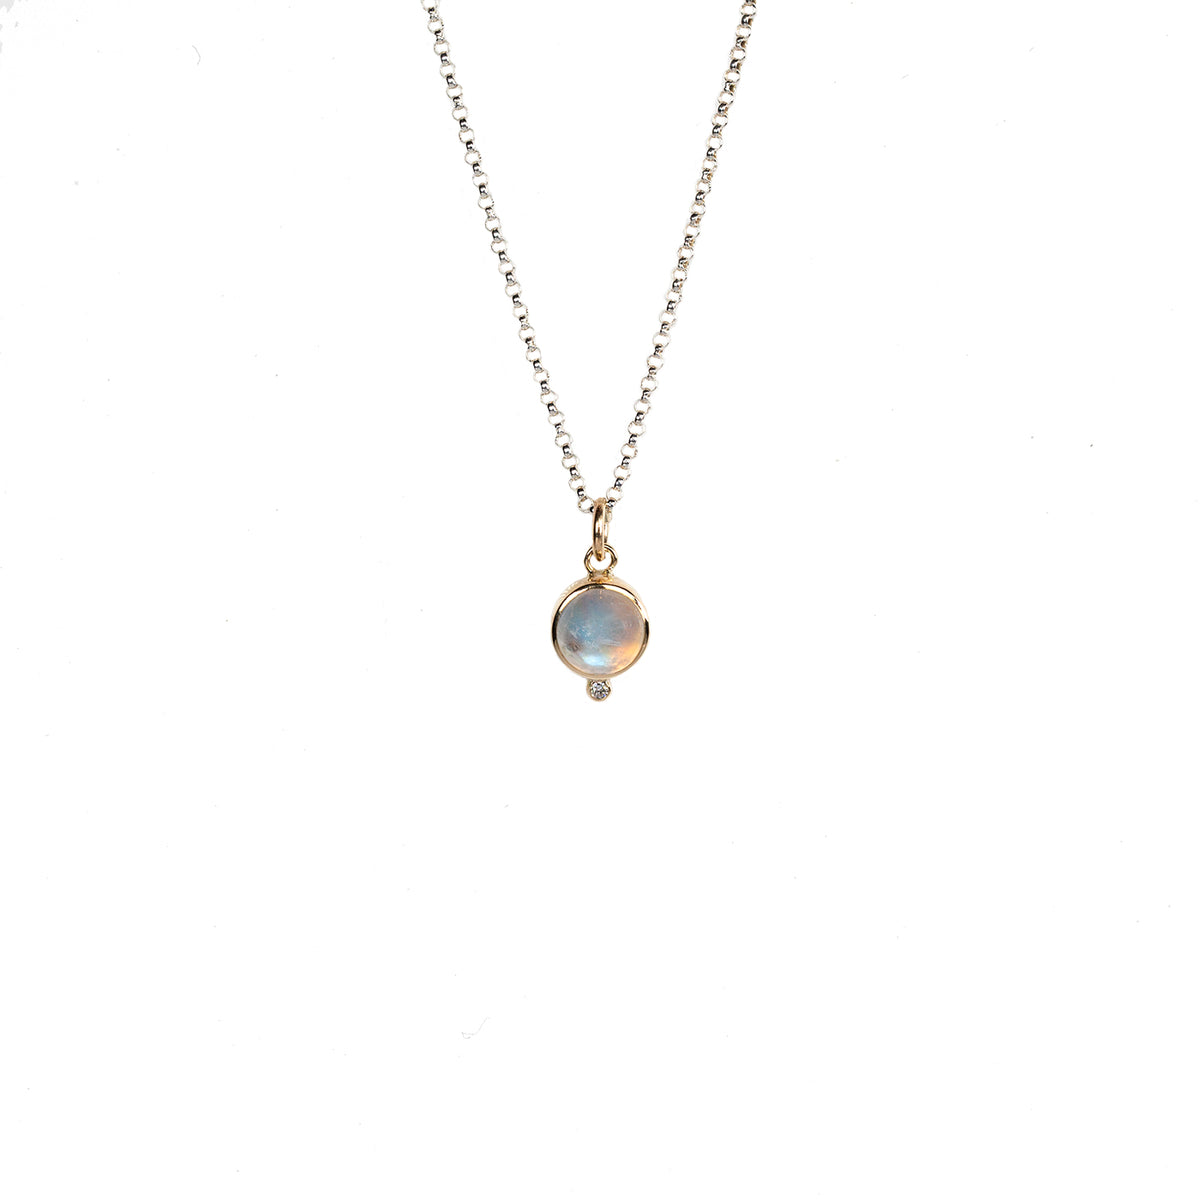 Astral Moonstone Necklace